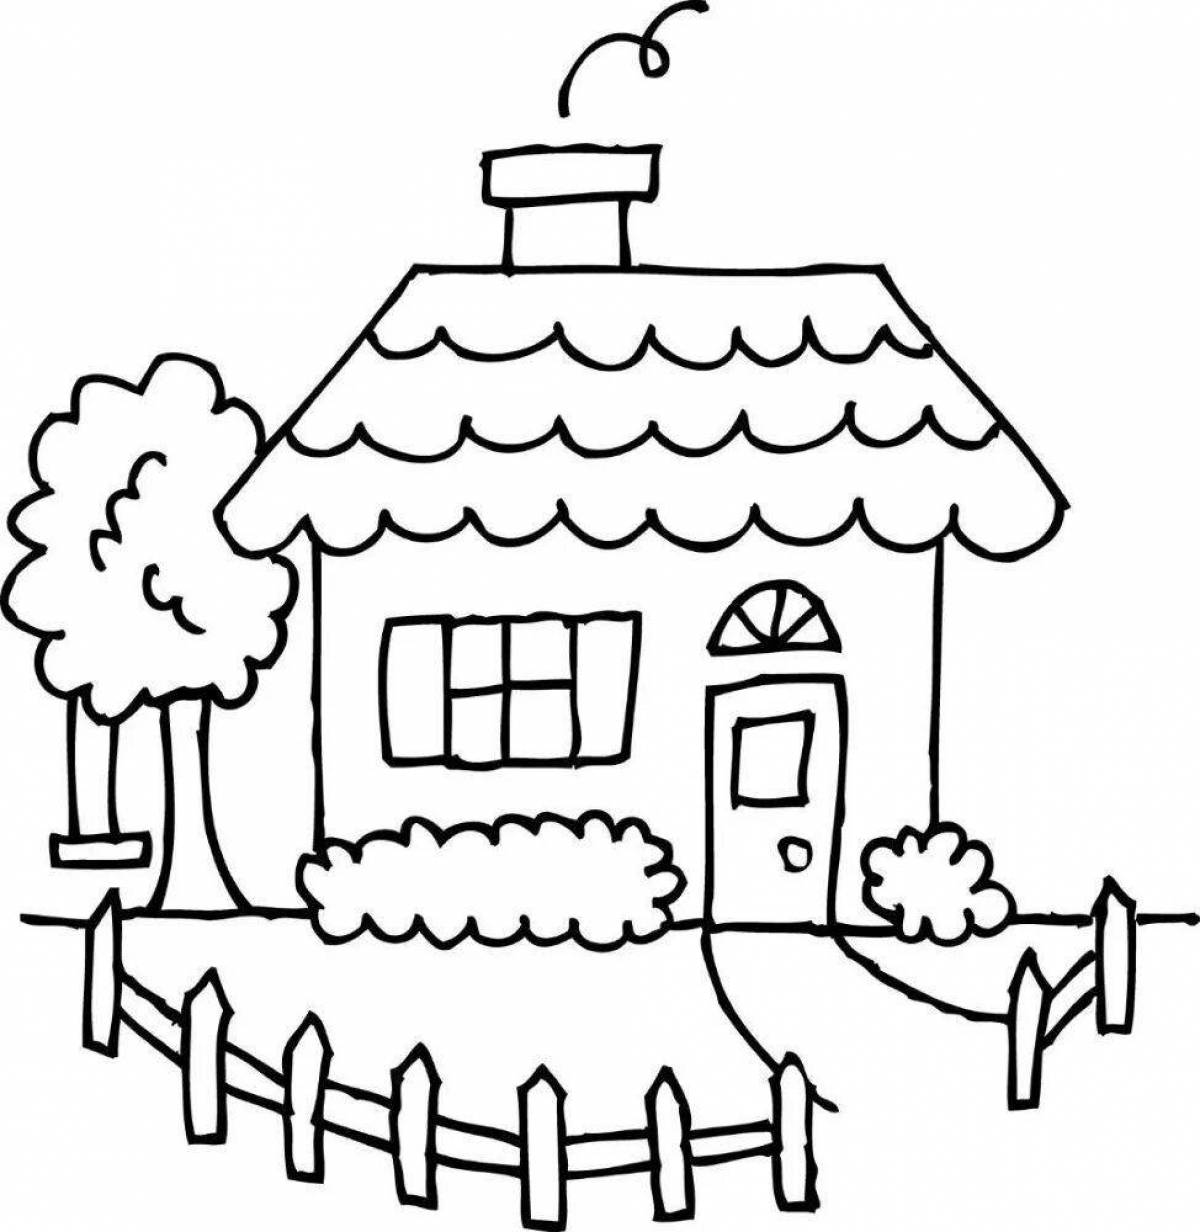 Stormy house coloring for kids